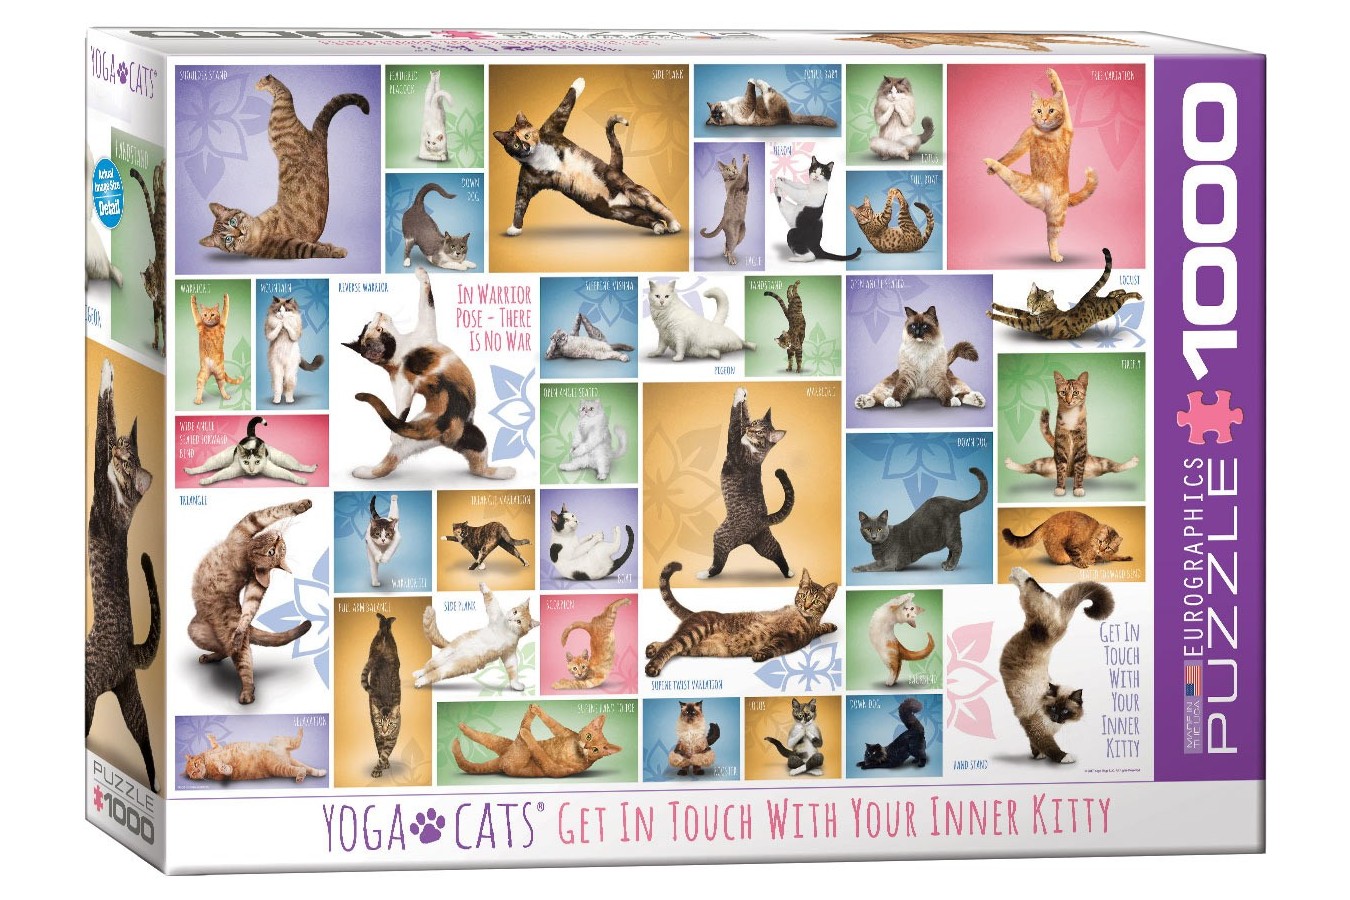 Puzzle Eurographics - Yoga Cats, 1000 piese (6000-0953)